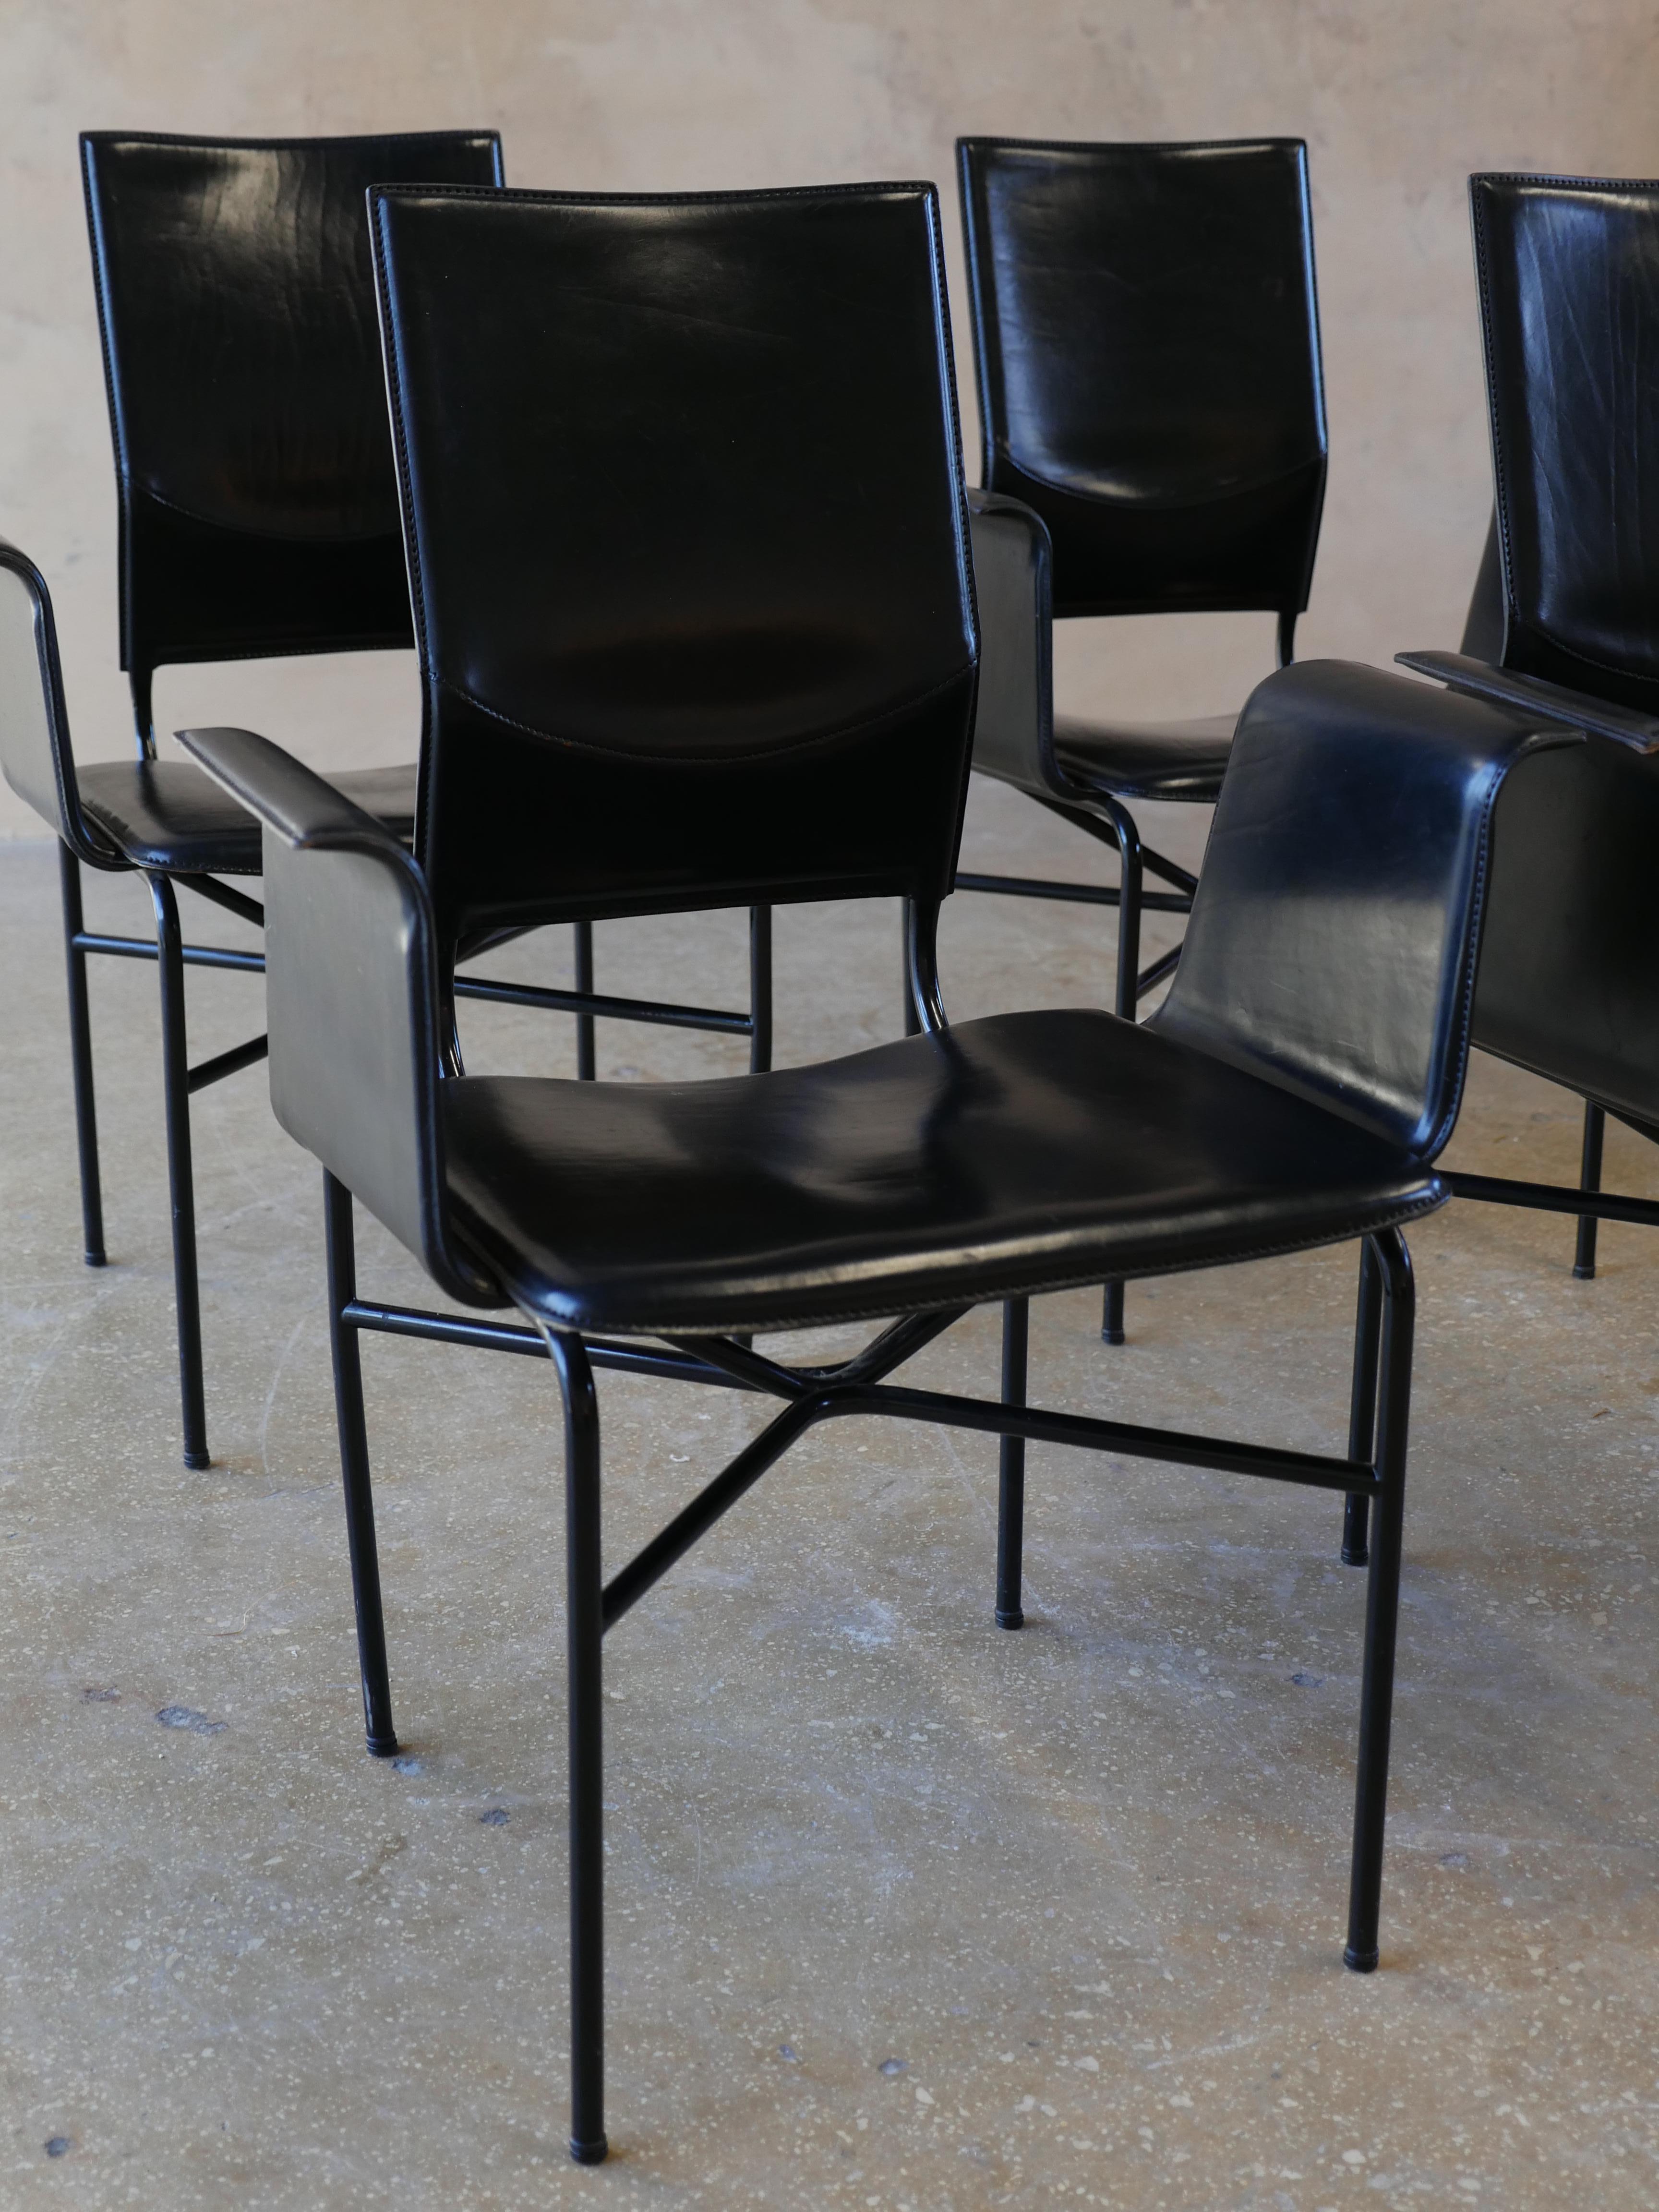 1980s, four beautiful black leather and steel armchairs by Ross Littell, for Matteo Grassi. The supple leather on the chairs is as soft to the touch today, as the day they were made. The winged arms on the chairs are a timeless design that fit well